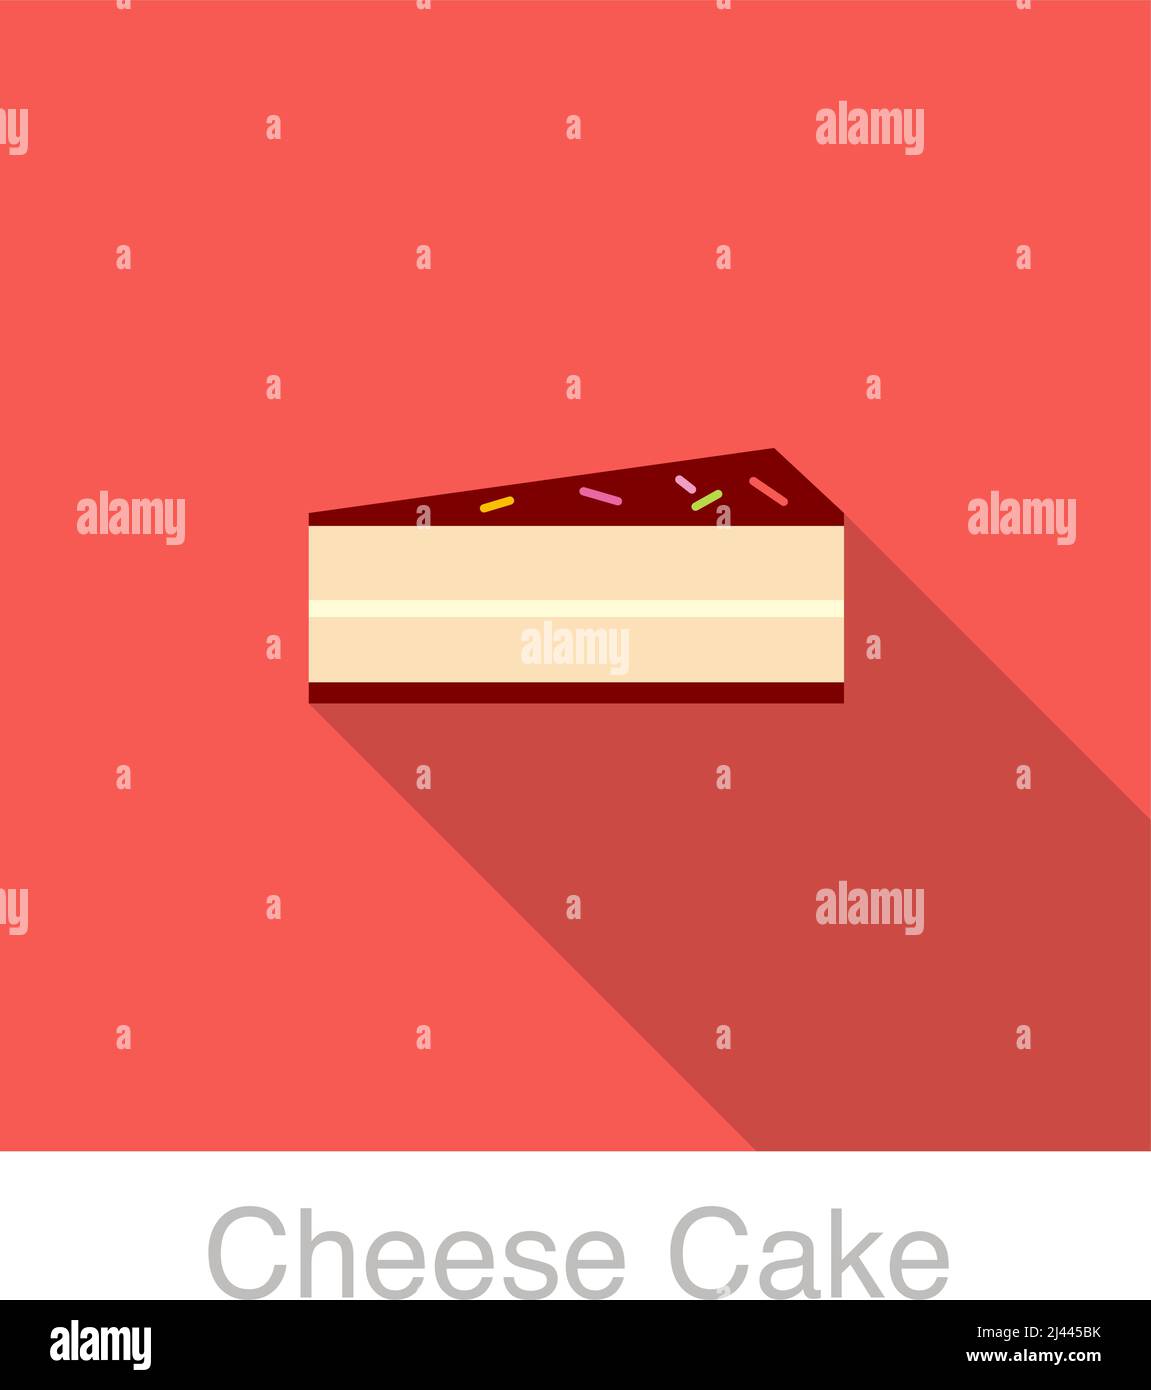 Cheese cake food flat icon design  vector illustration Stock Vector